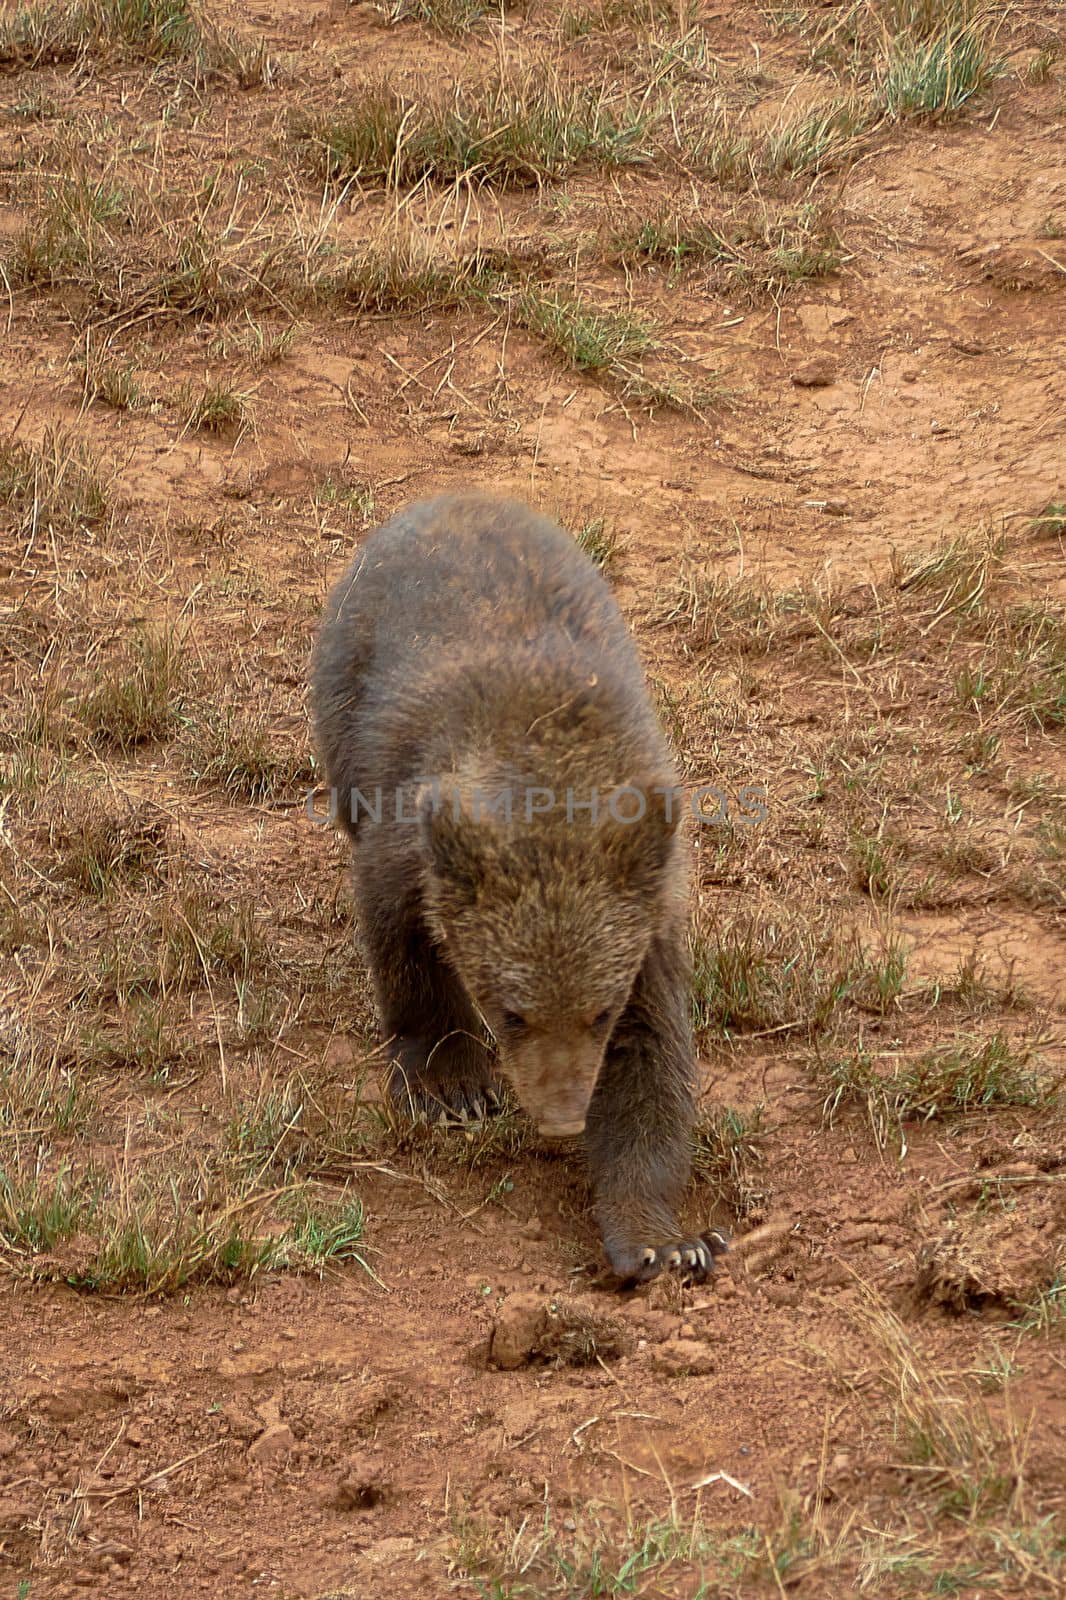 Brown bear cub eating grass in the mountains. bear cub, camnio, land, lonely, games, behaviour